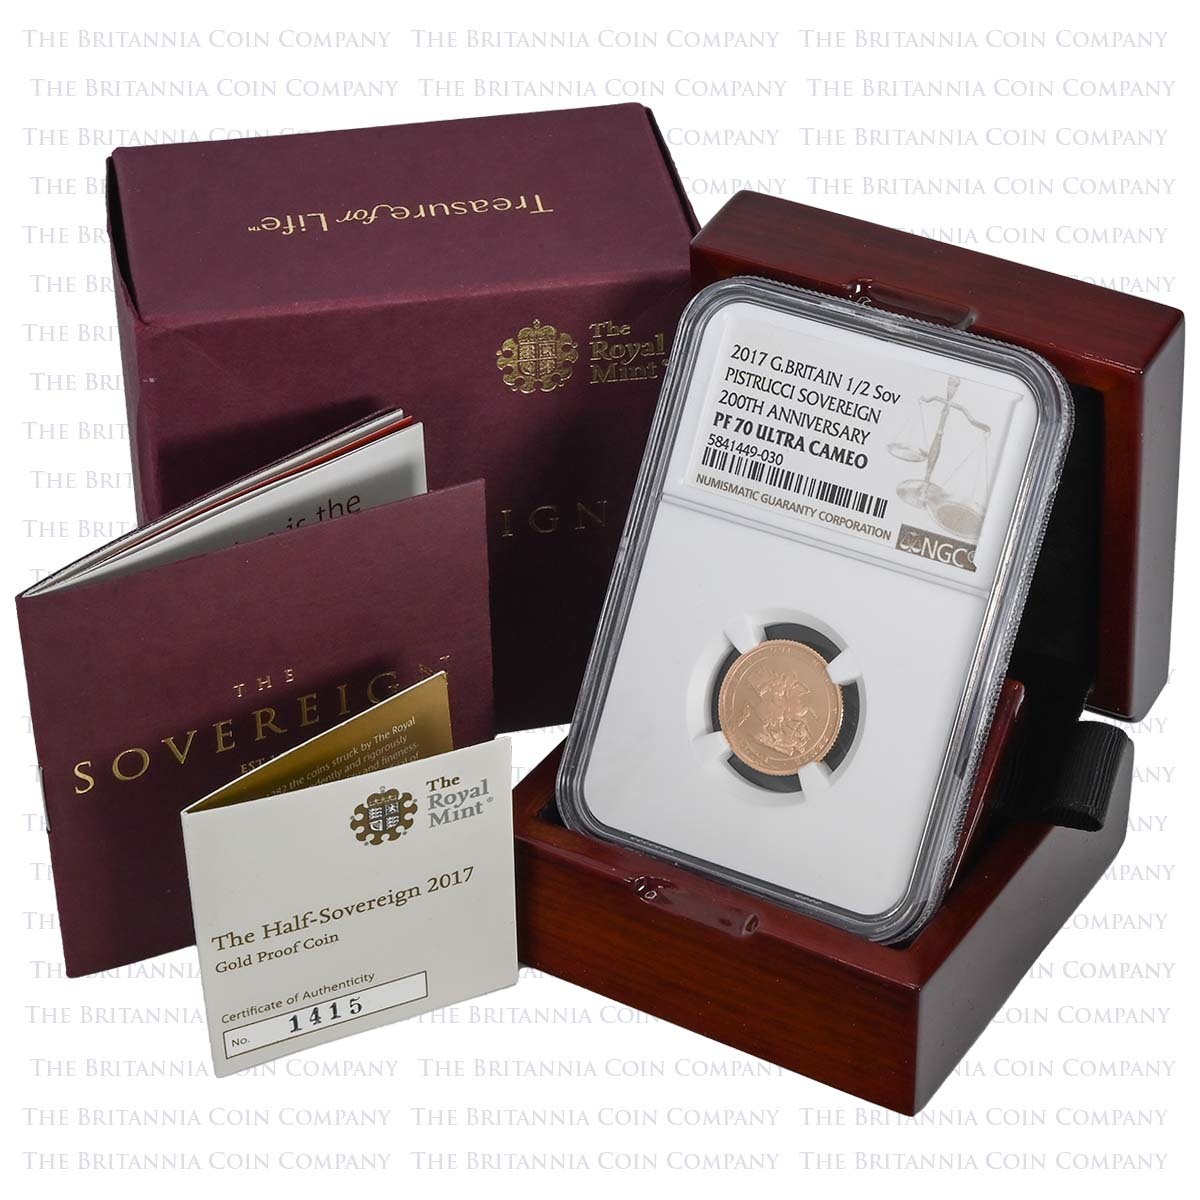 SVH17 2017 Elizabeth II Gold Proof Half Sovereign 200th Anniversary Coin NGC Graded PF 70 Ultra Cameo Boxed